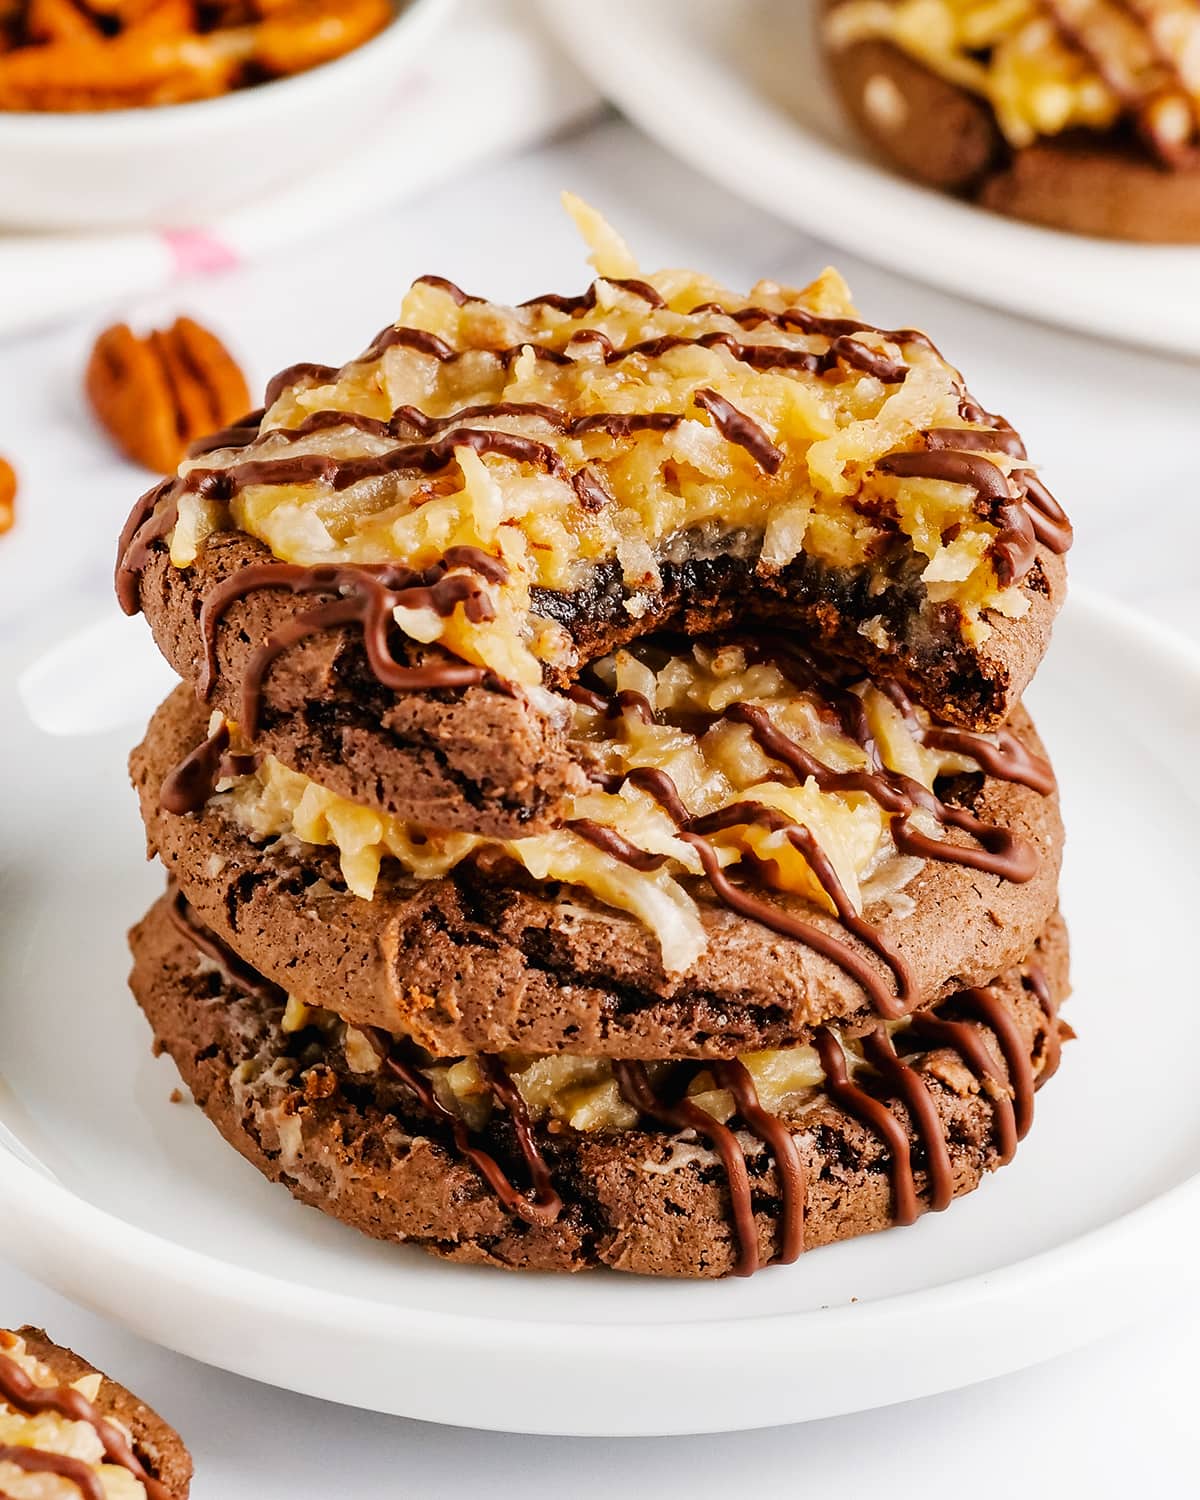 Three German Chocolate Cake Cookies stacked together with coconut pecan frosting on top, the top cookie has a bite out of it.